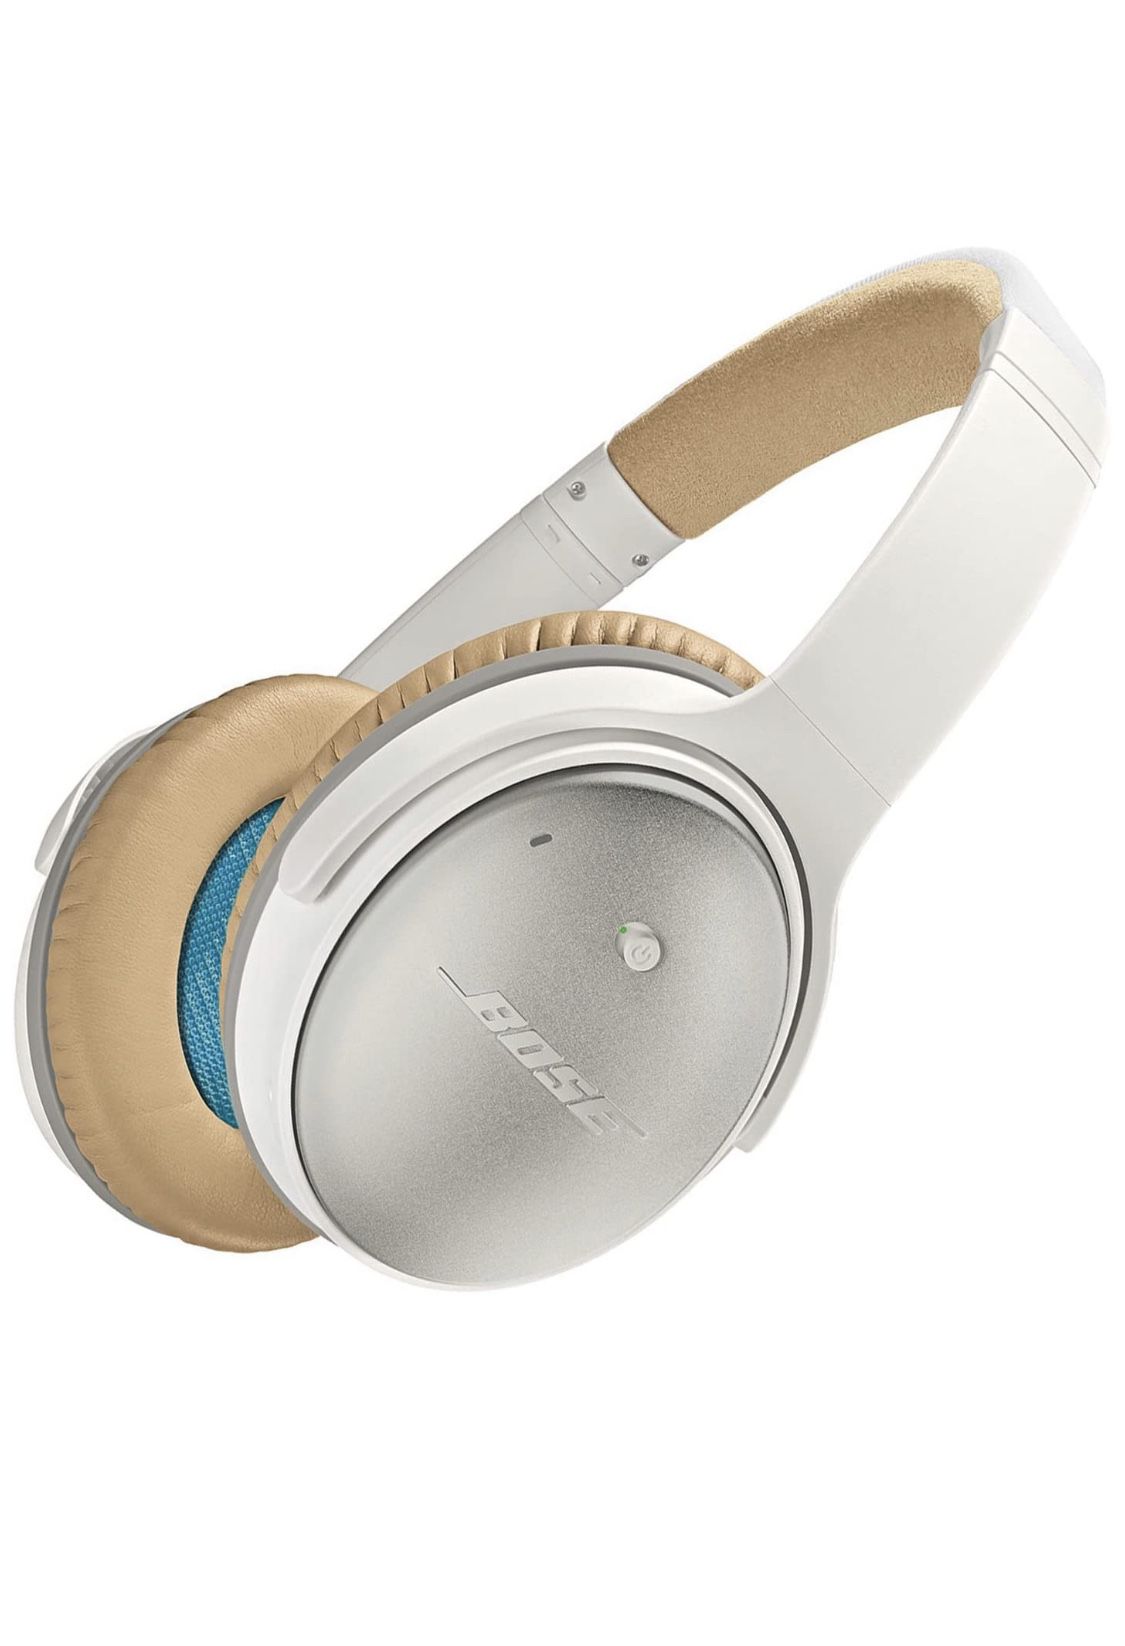 Bose QuietComfort 25 Acoustic Noise Cancelling Headphones - White (Wired 3.5mm)